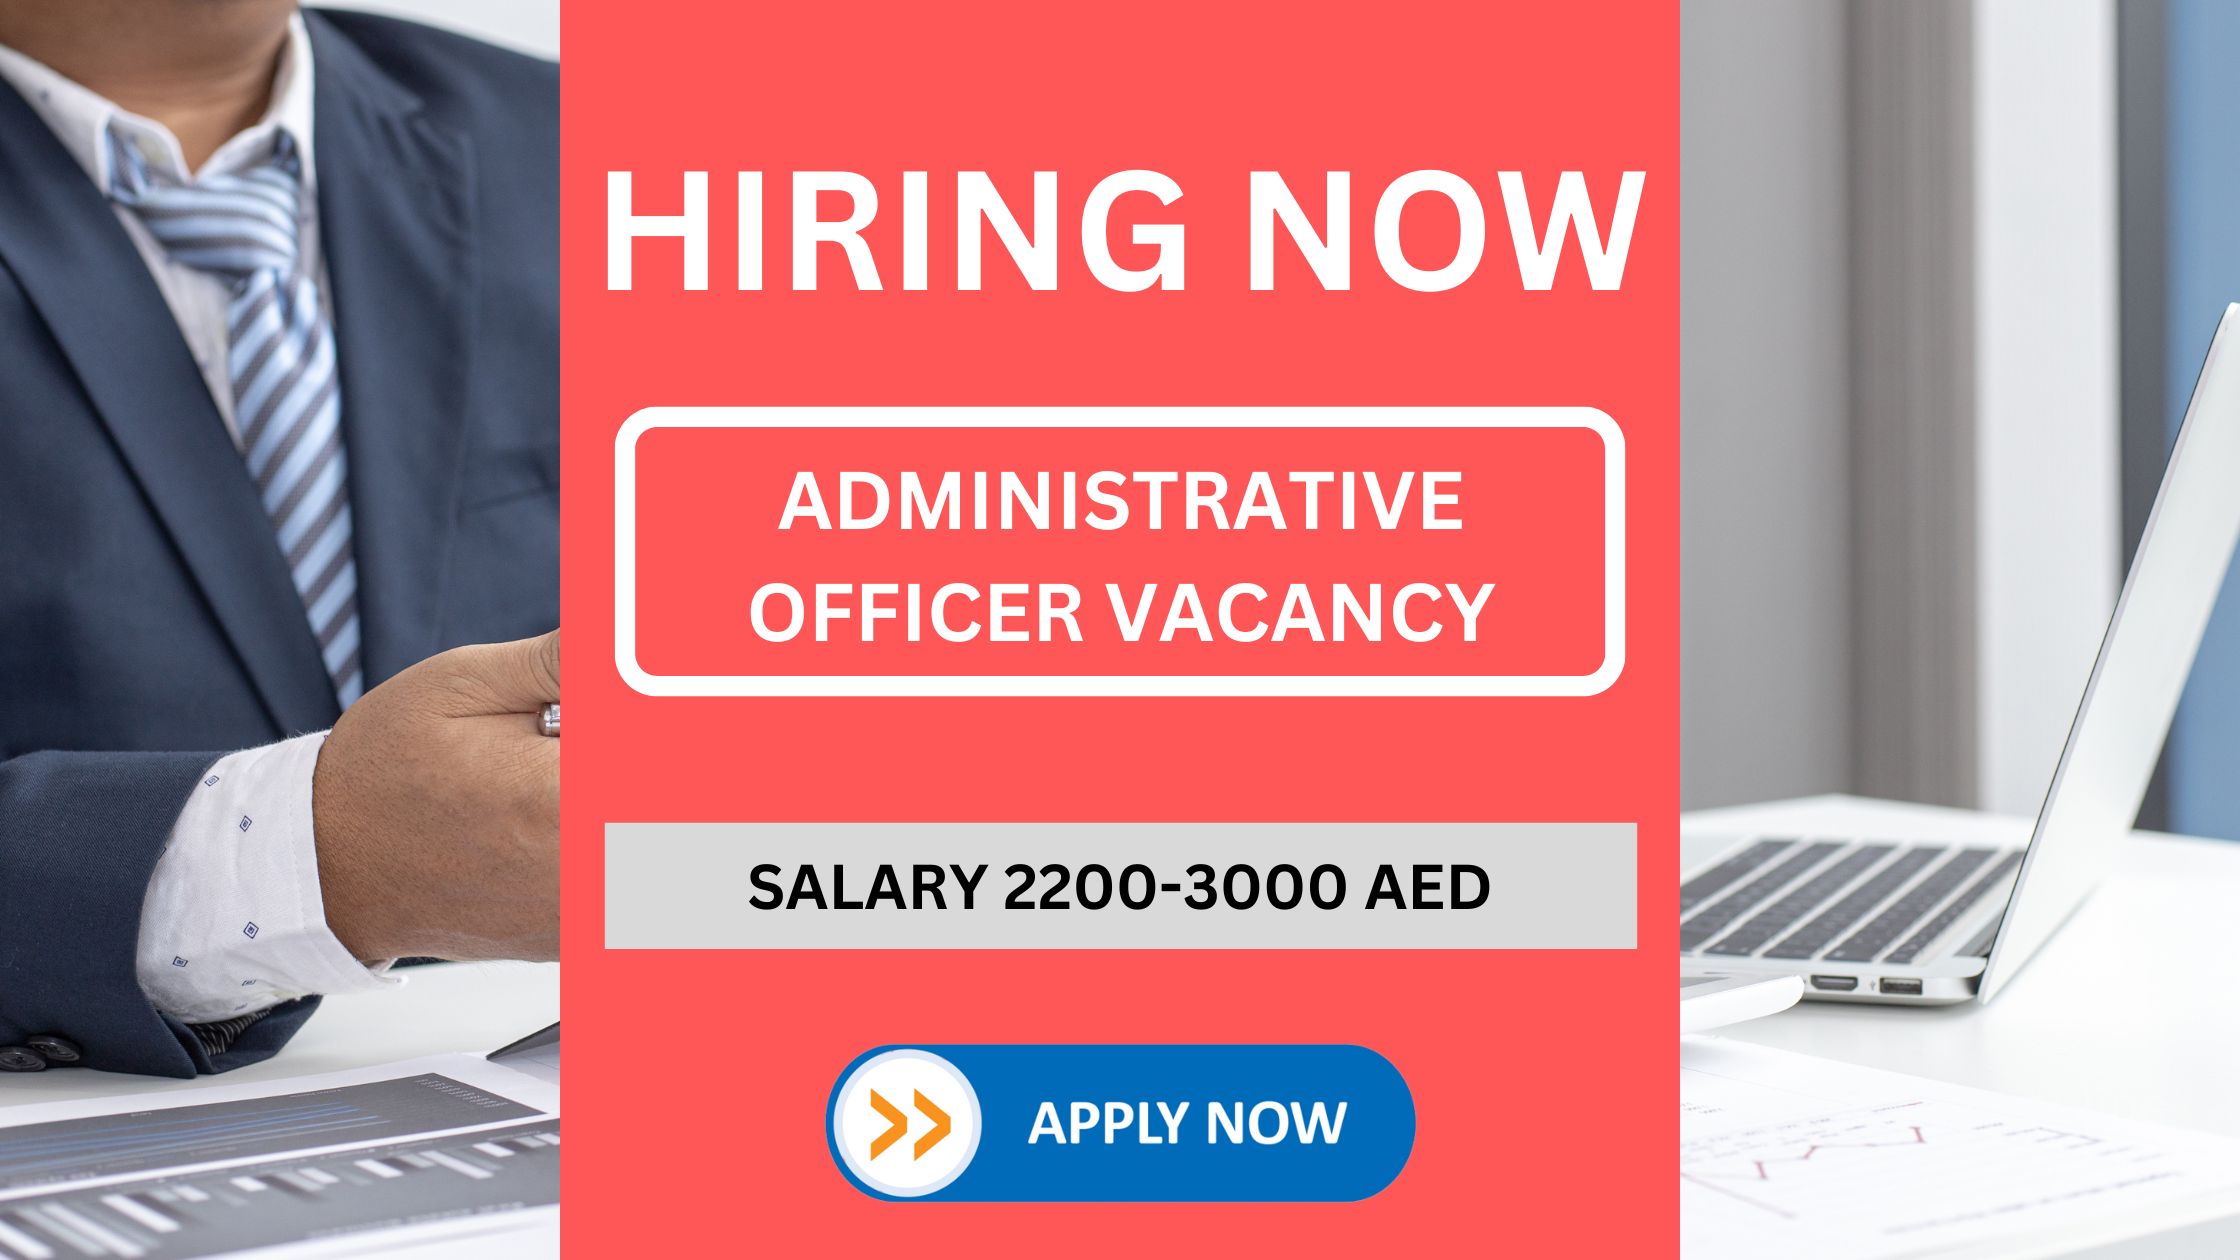 Administrative Officer Vacancy - At least 3+ years of experience